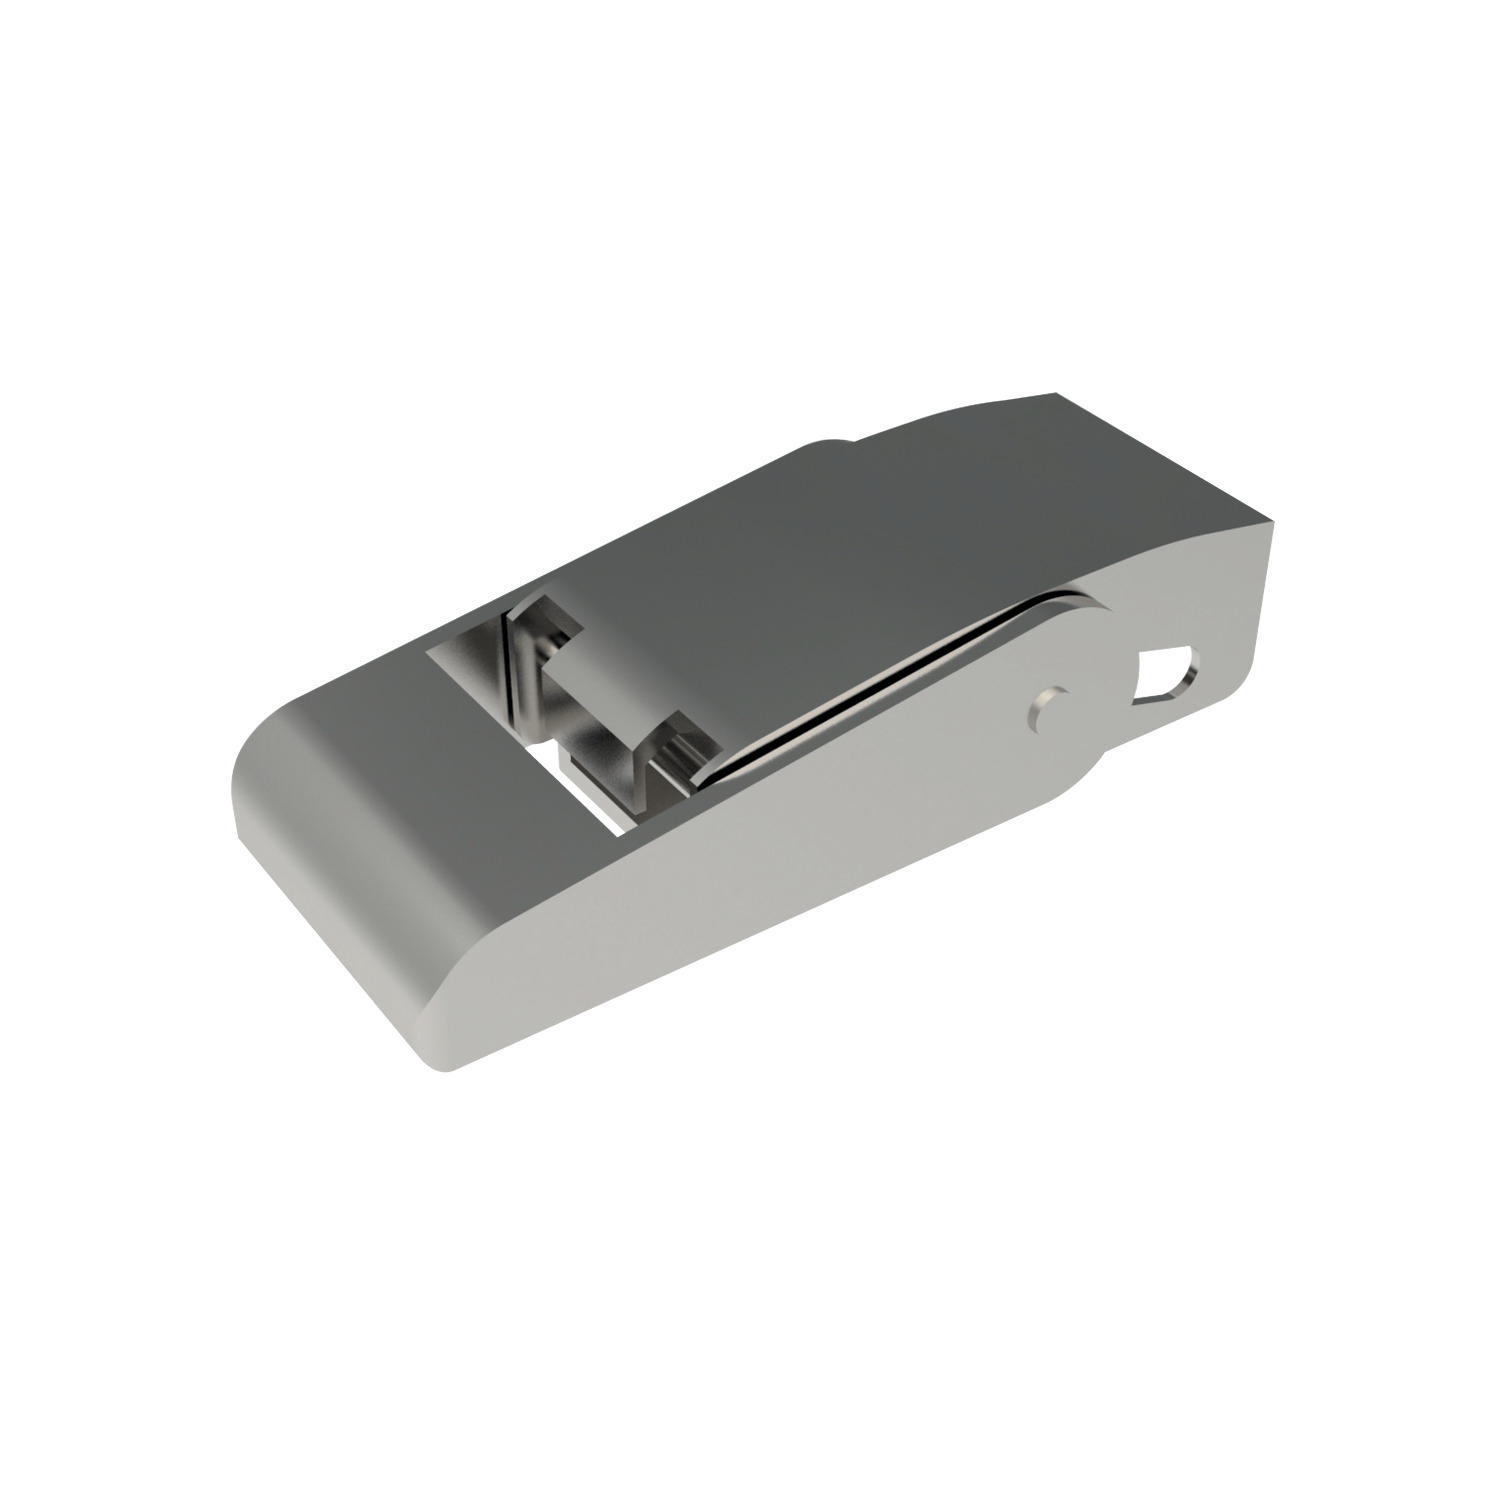 J0300 Draw Latches - Spring Loaded